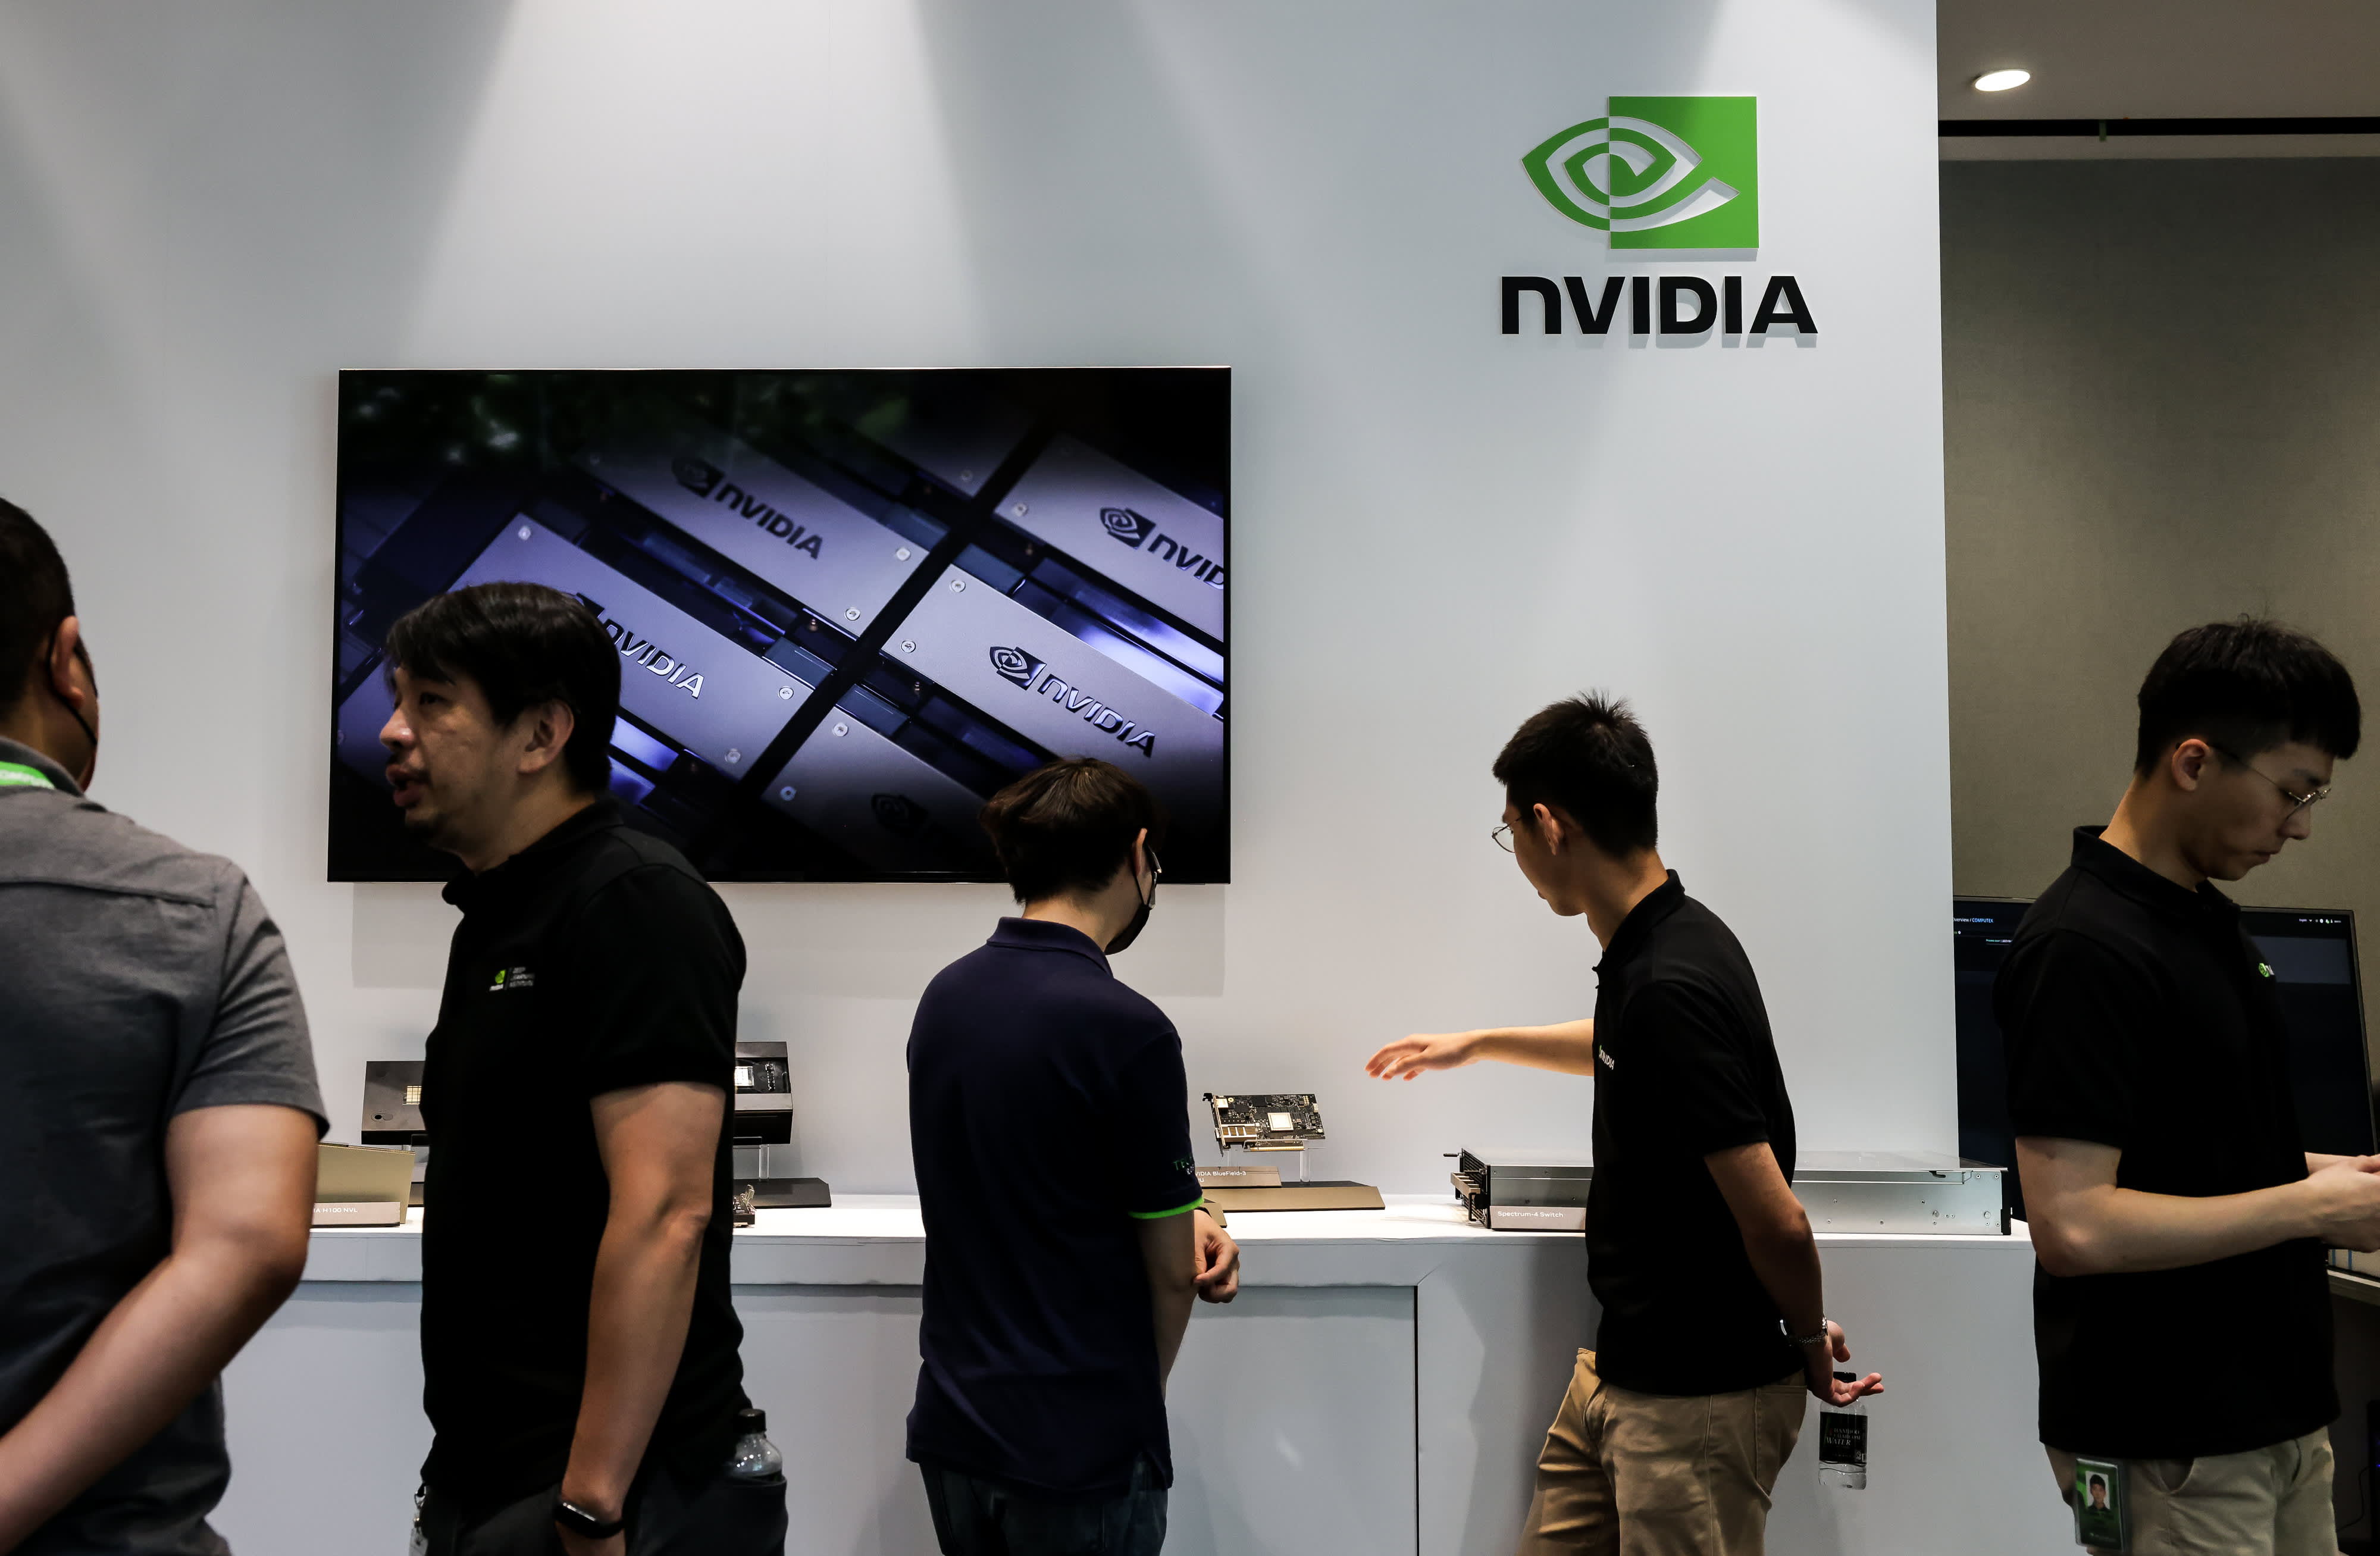 Don't expect Nvidia's rally to lose steam, Citi says